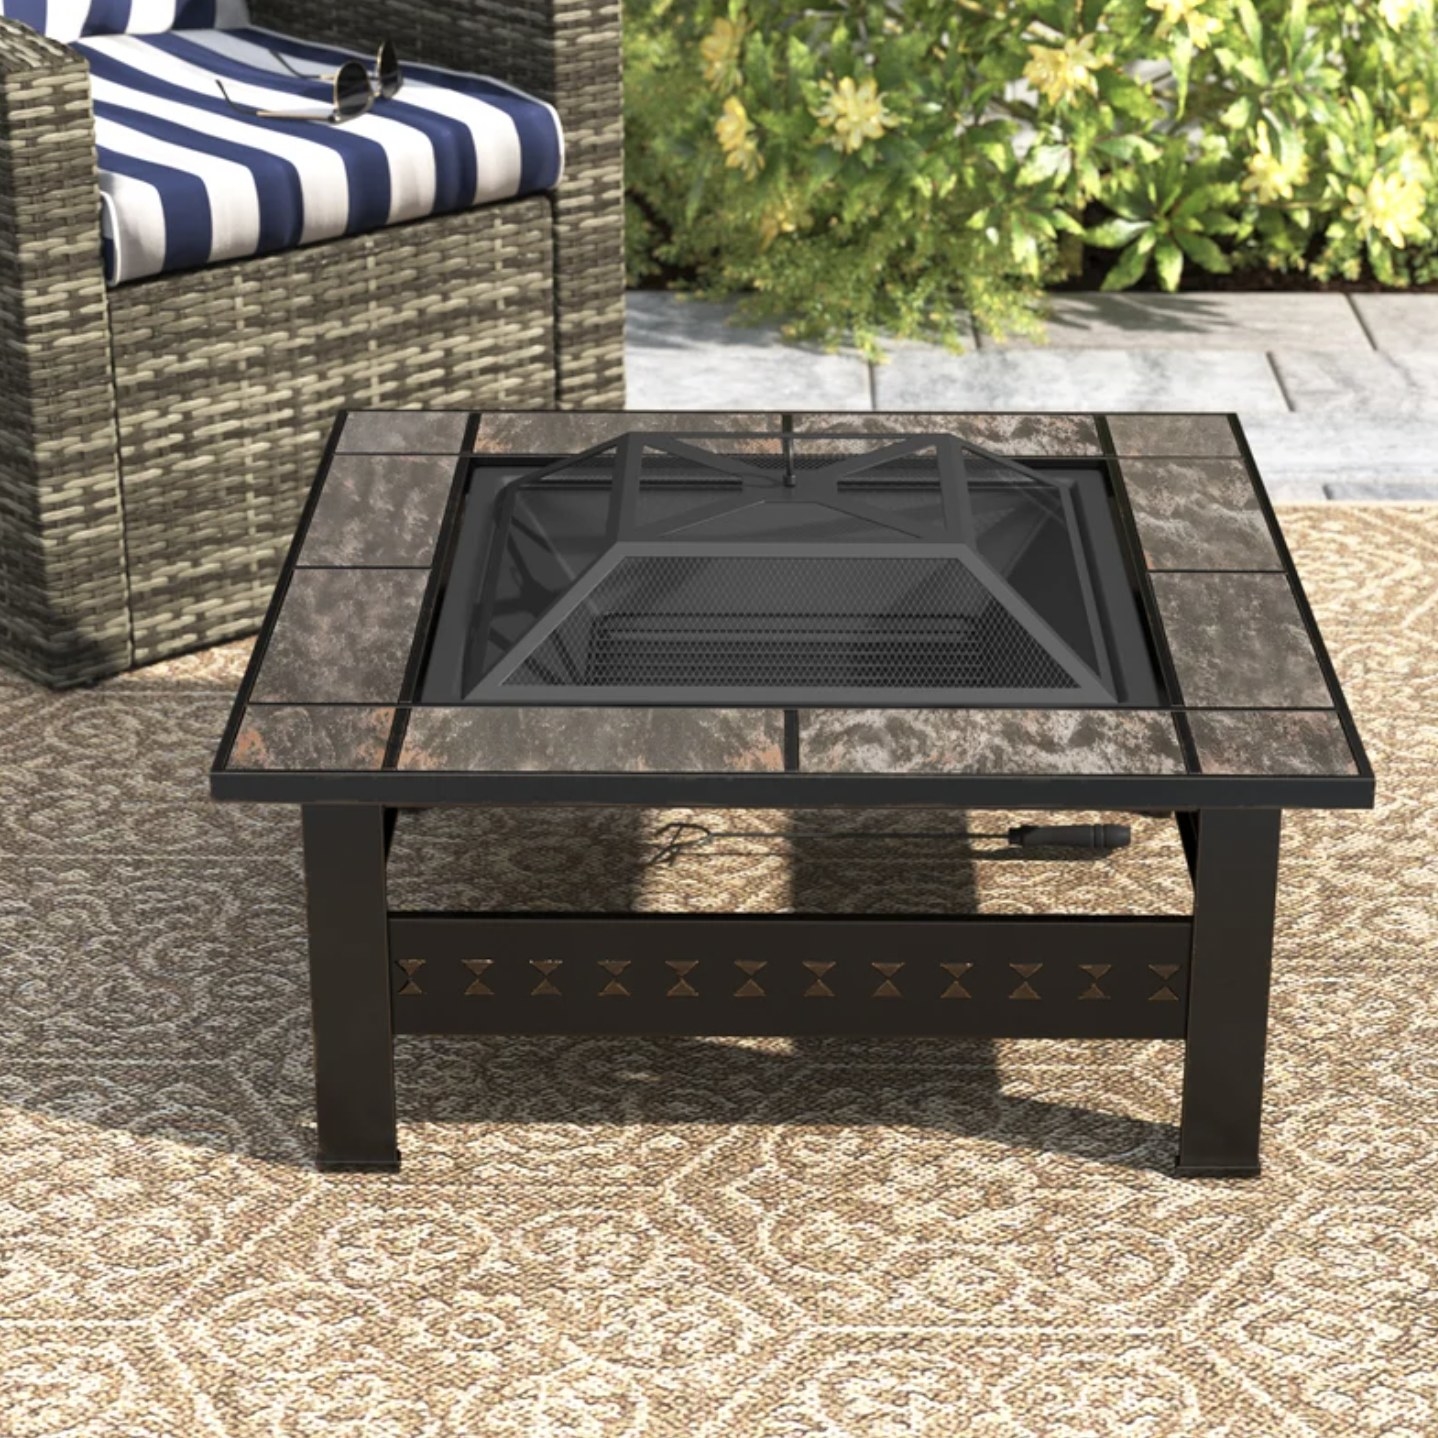 the fire pit on outdoor rug with no wood inside middle burning pit